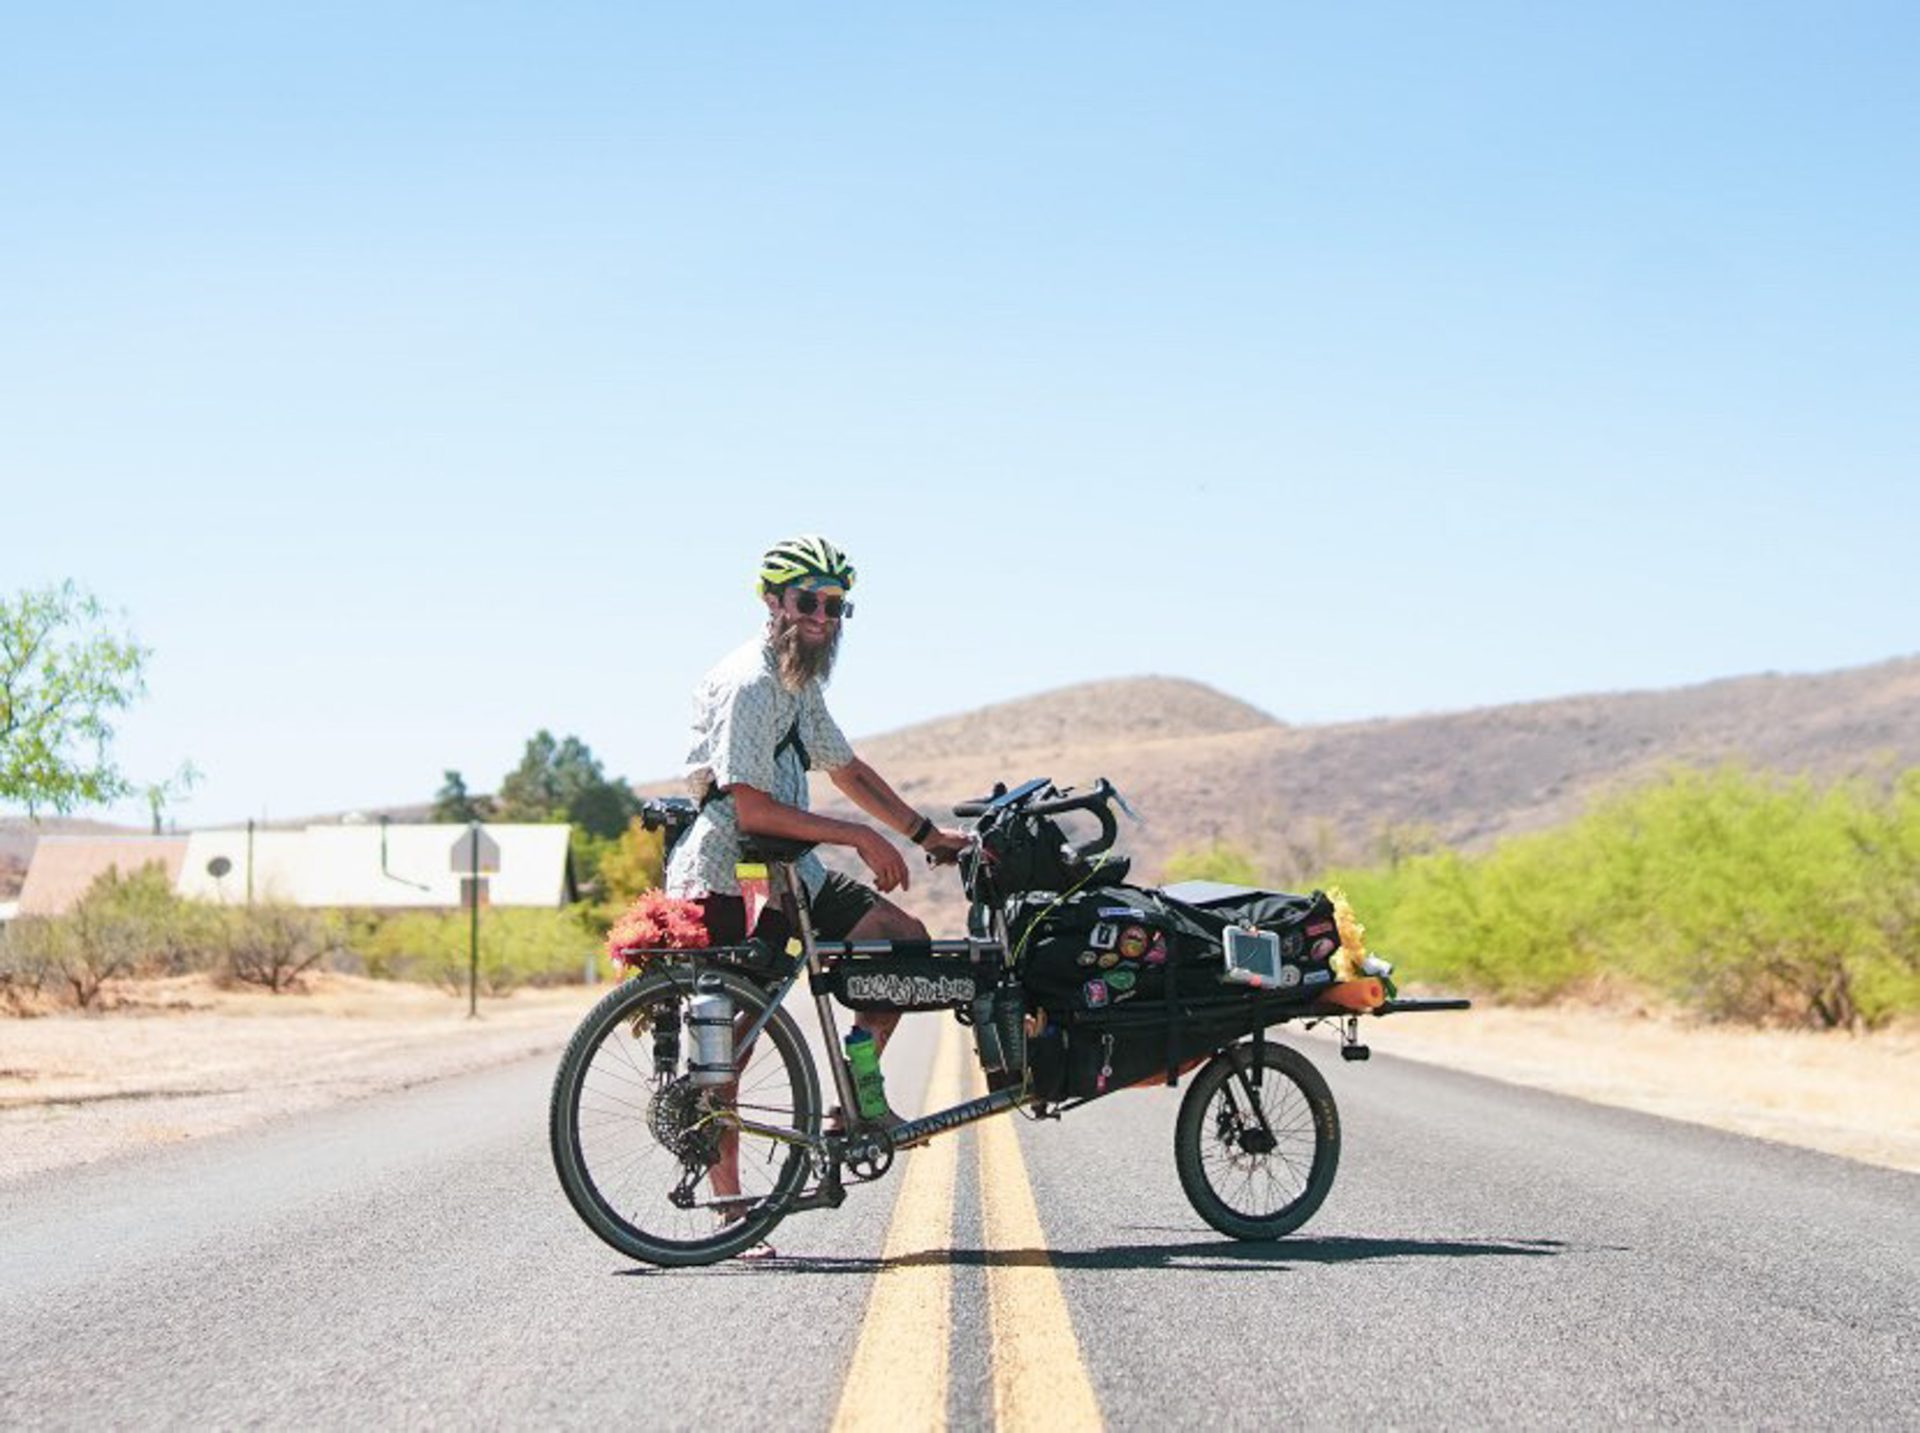 Binggeser poses with his bike, standing in the middle of a road in what looks like a dry, Arizona-desert landscape.